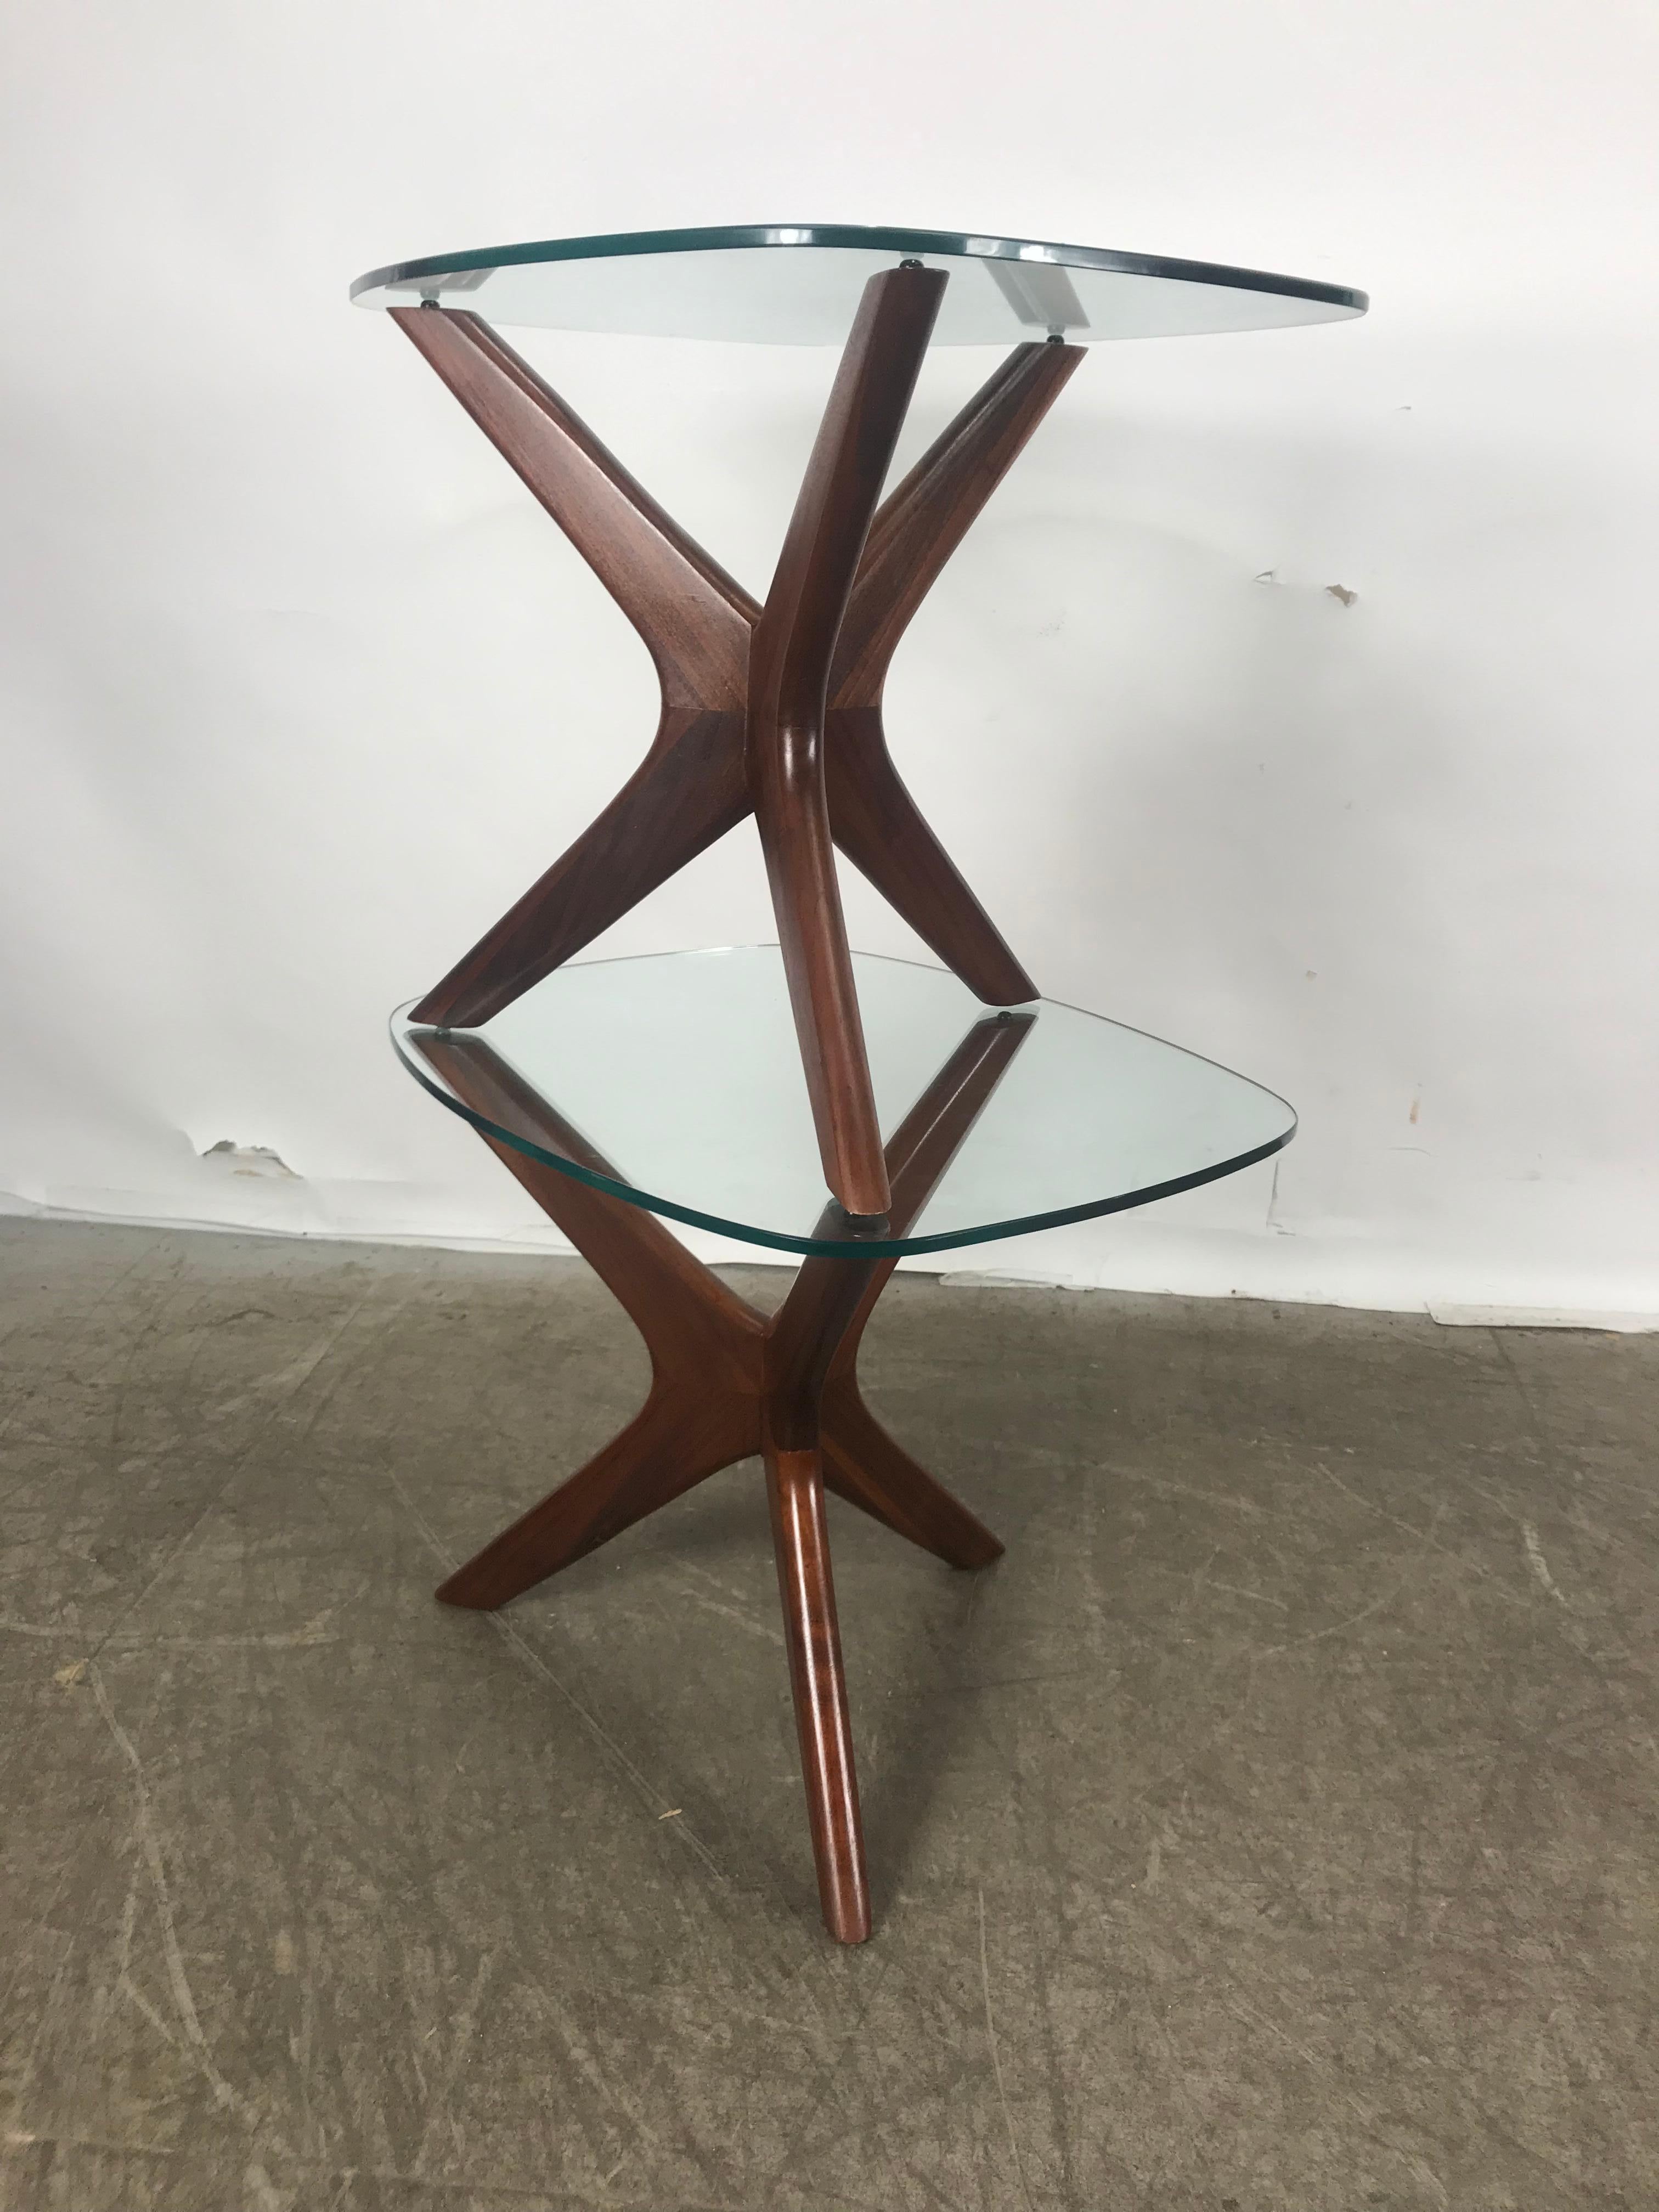 Classic Mid-Century Modern sculptural lamp tables, each with interlocking boomerang form walnut bases supporting asymmetrically flared square glass tops. By Adrian Pearsall for Craft Associates, American, circa 1950.